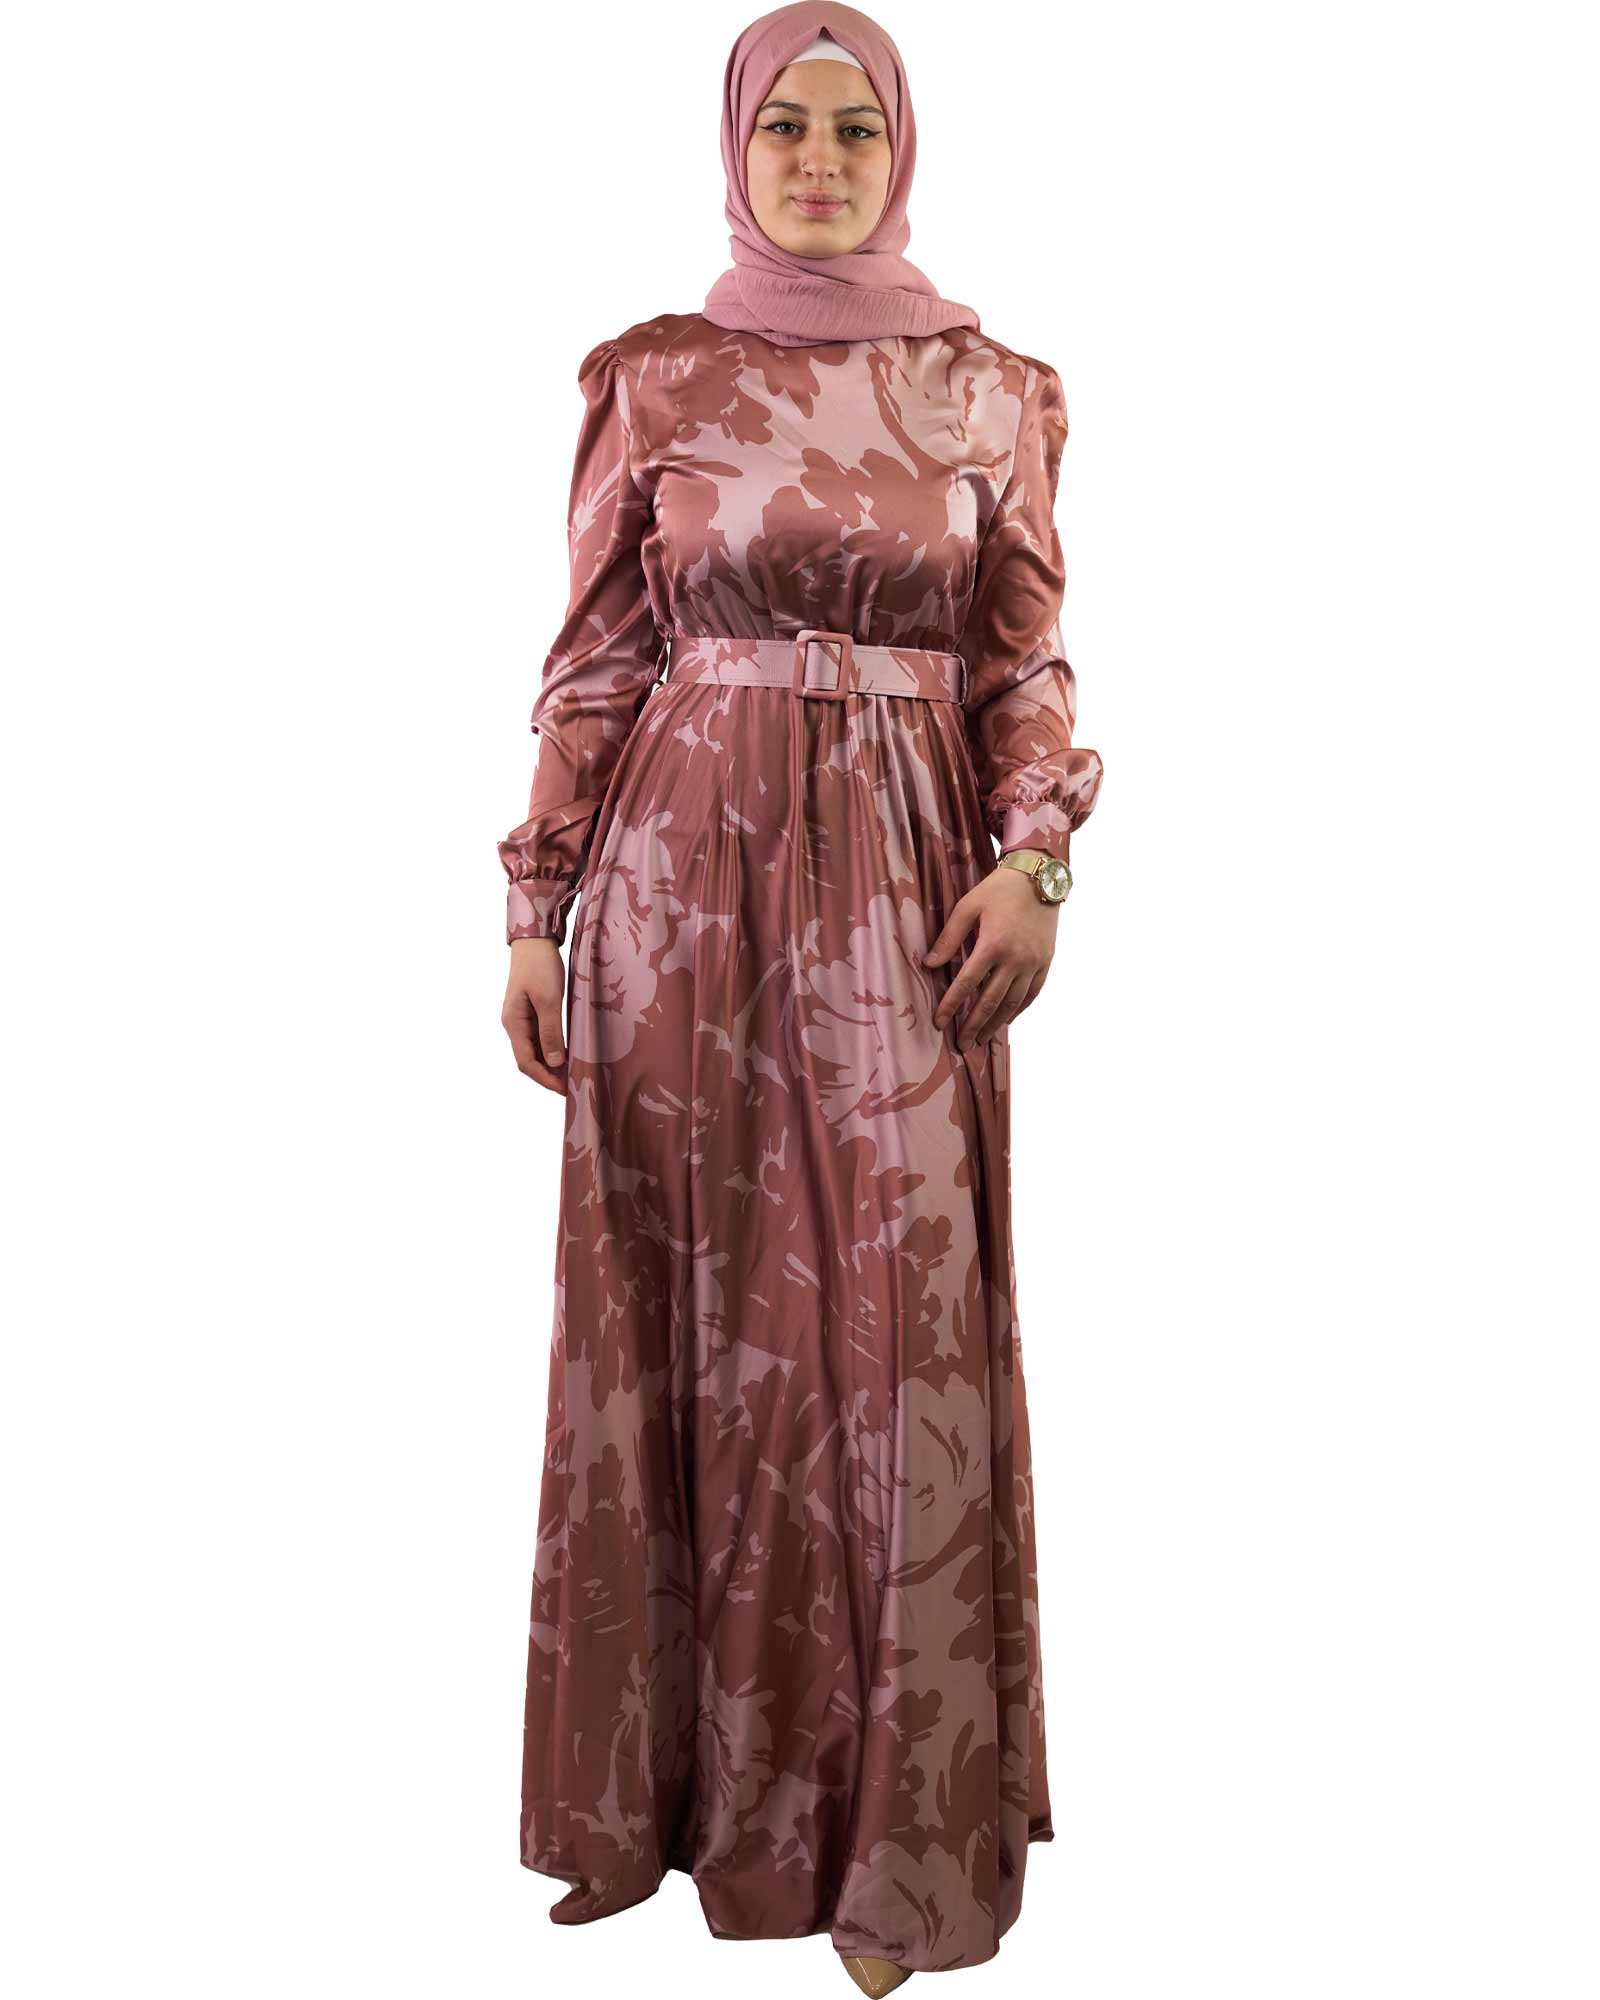 Satin dress with floral pattern and belt